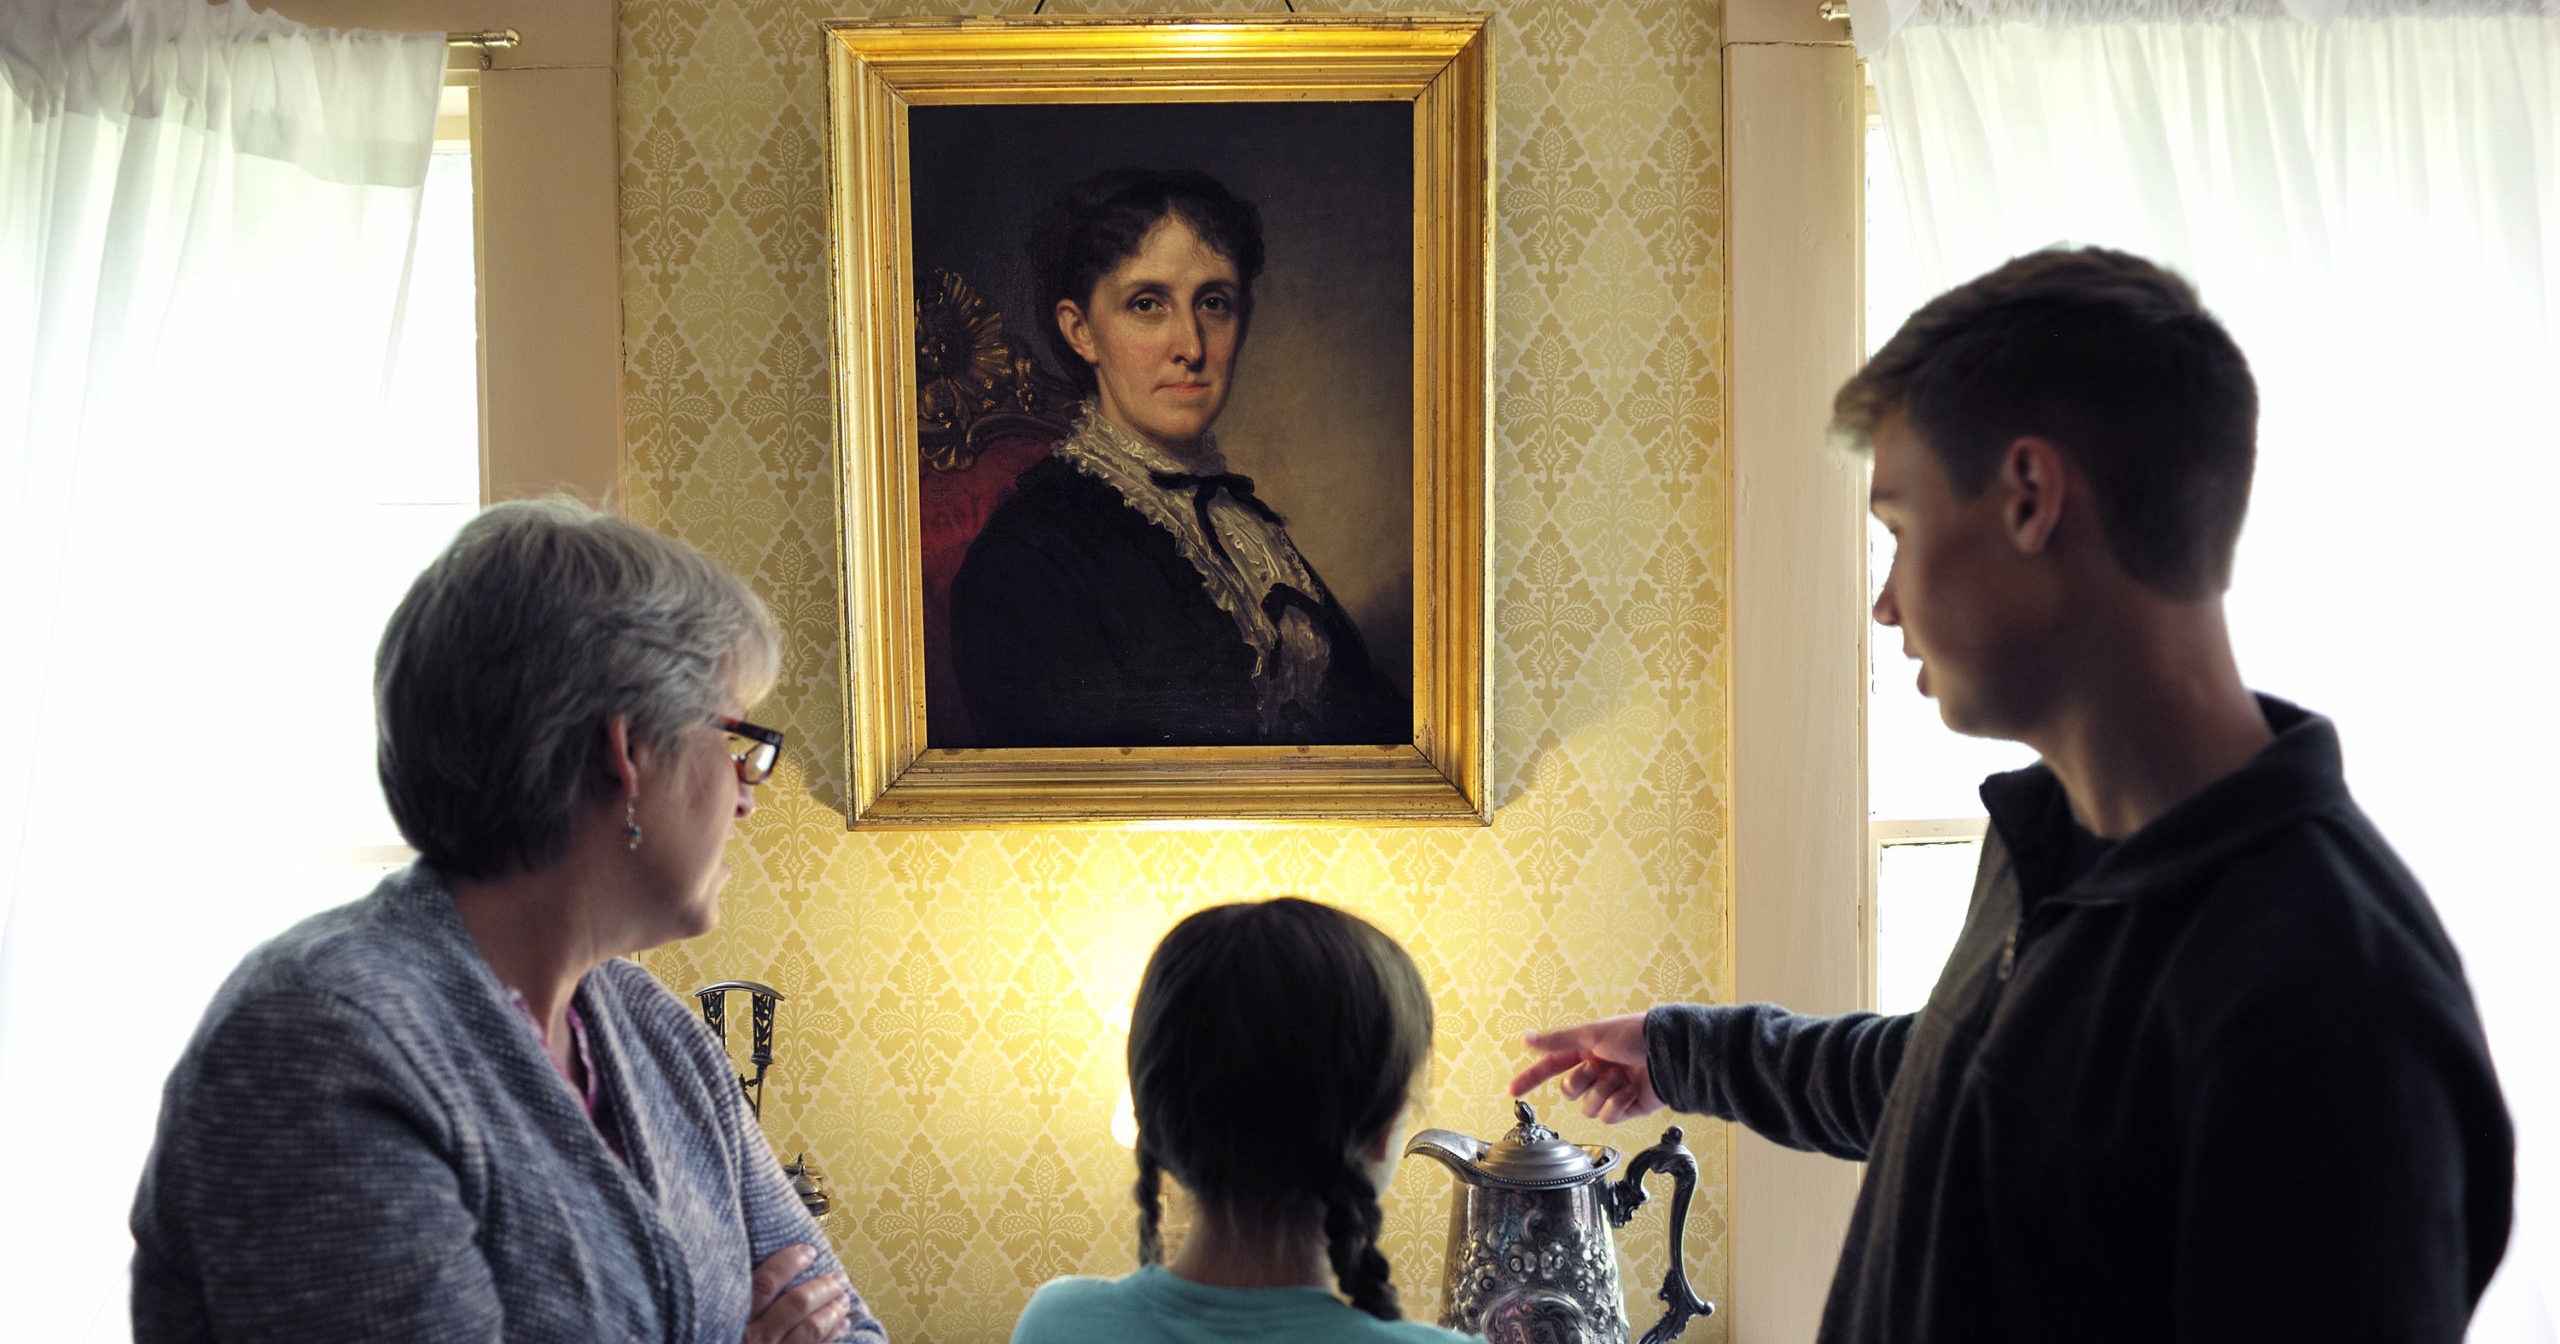 In this May 17, 2018, file photo, museum visitors stand near a portrait of author Louisa May Alcott at Orchard House in Concord, Massachusetts. The current issue of The Strand Magazine will give readers the chance to discover an obscure and unfinished work of fiction by Alcott, "Aunt Nellie's Diary," and to provide a conclusion themselves.